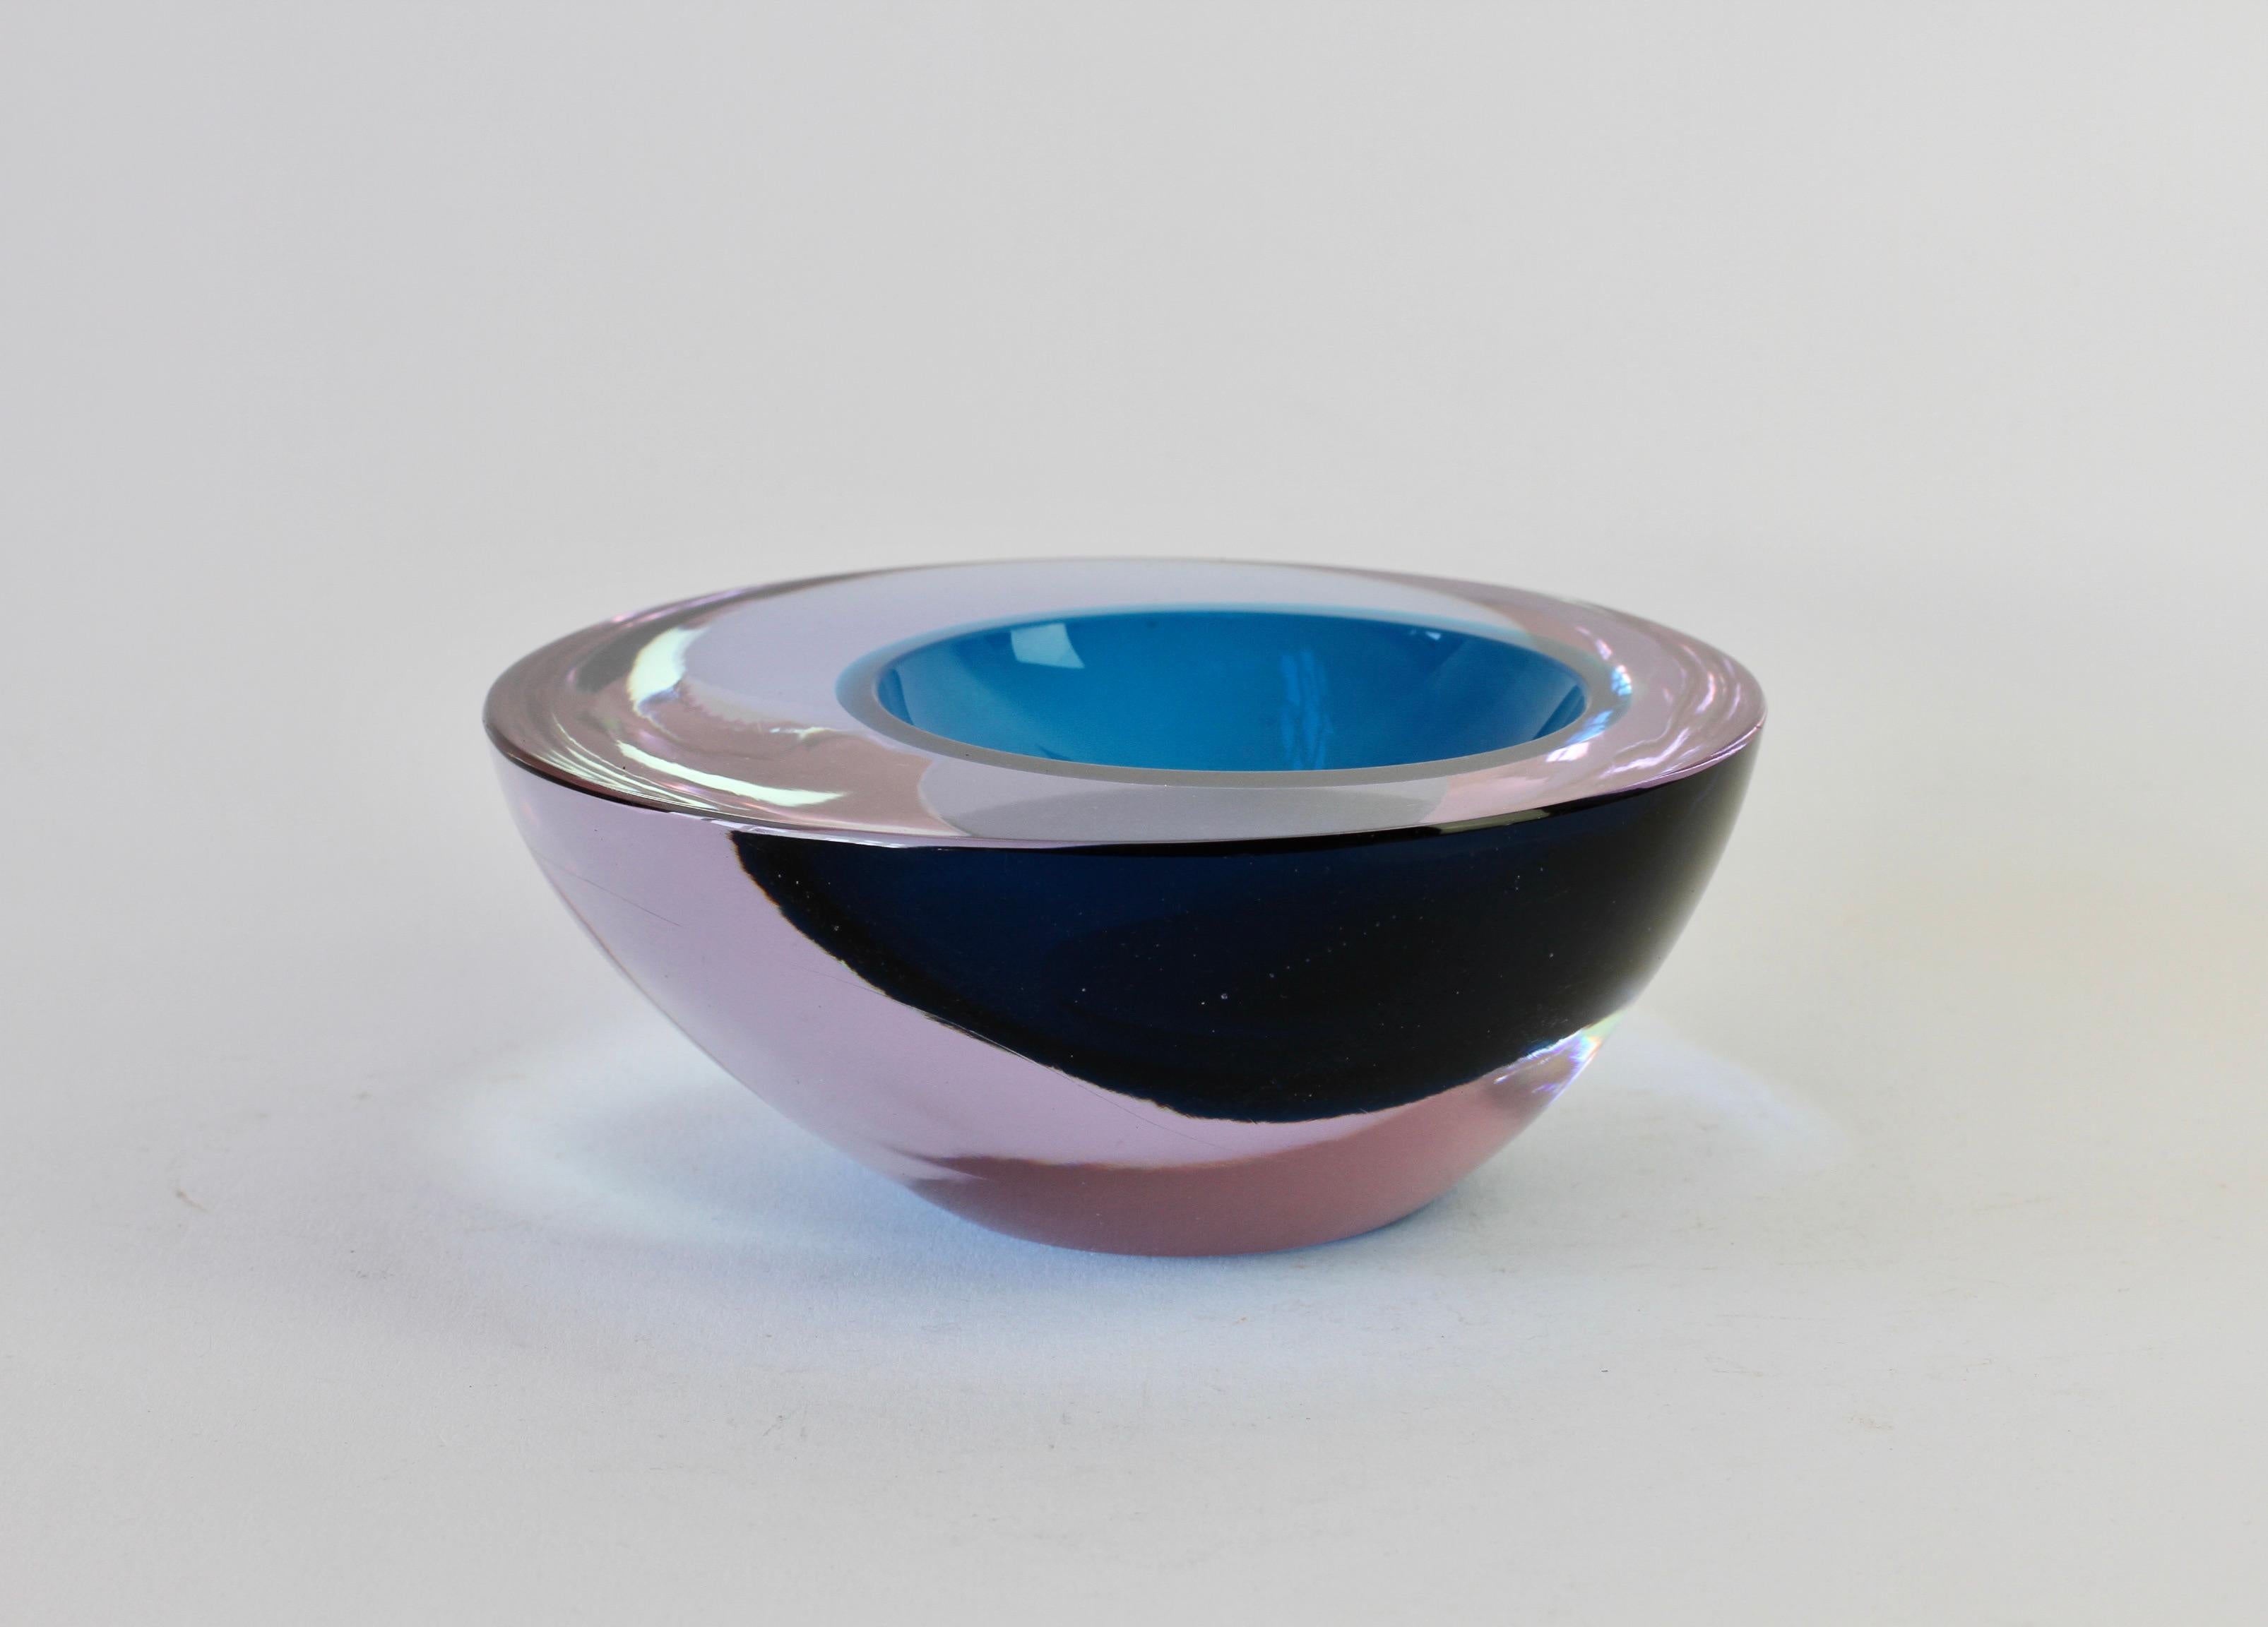 Large Italian Alexandrite and Blue Sommerso Murano Glass Bowl, Dish or Ashtray For Sale 6